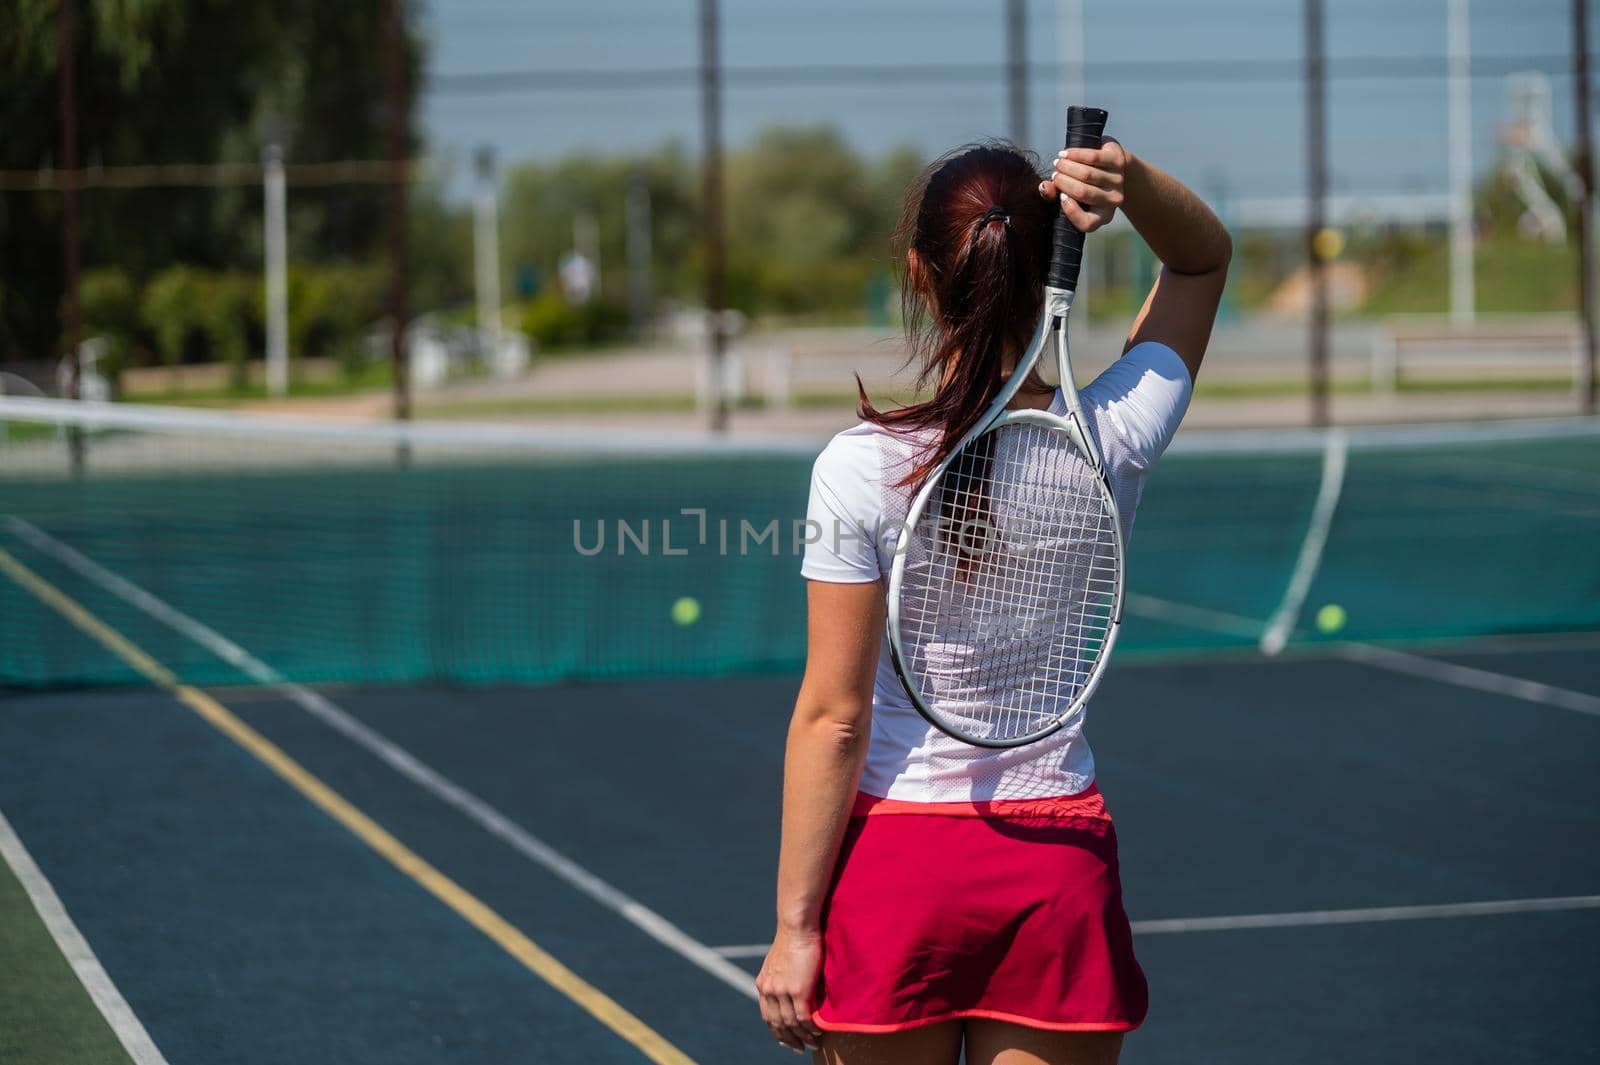 Woman in skirt standing back on the tennis court and holds the racket